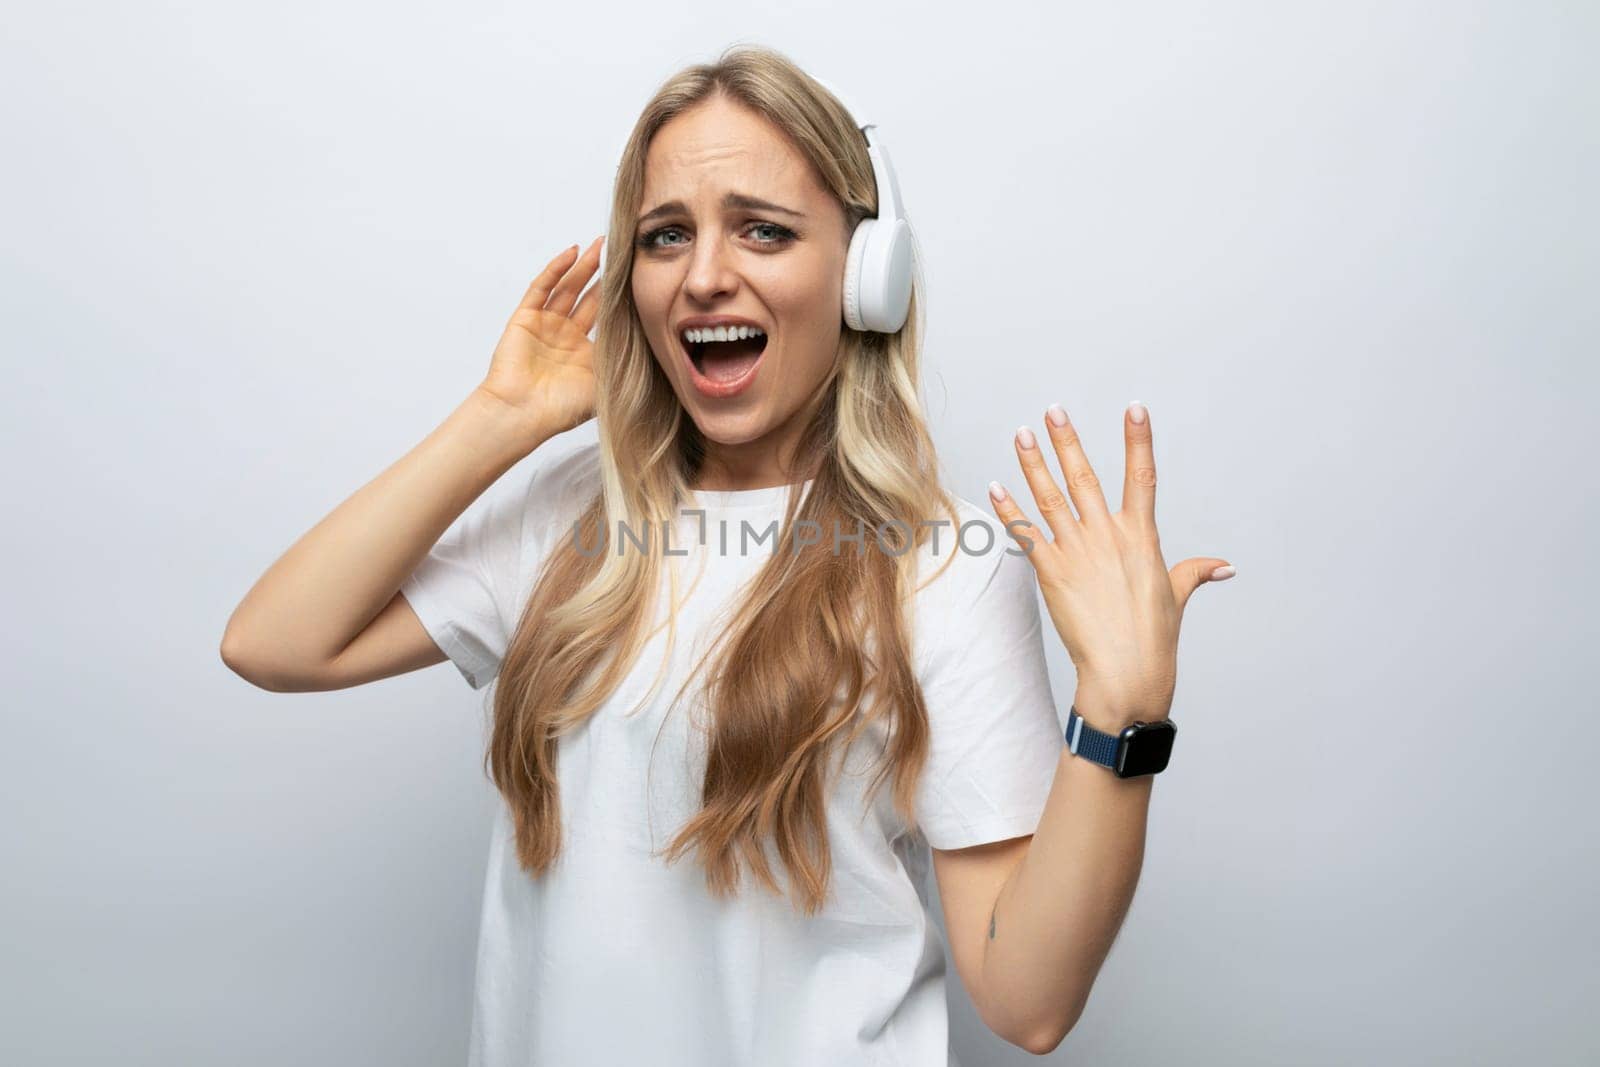 young woman sings along to music from headphones among white background.